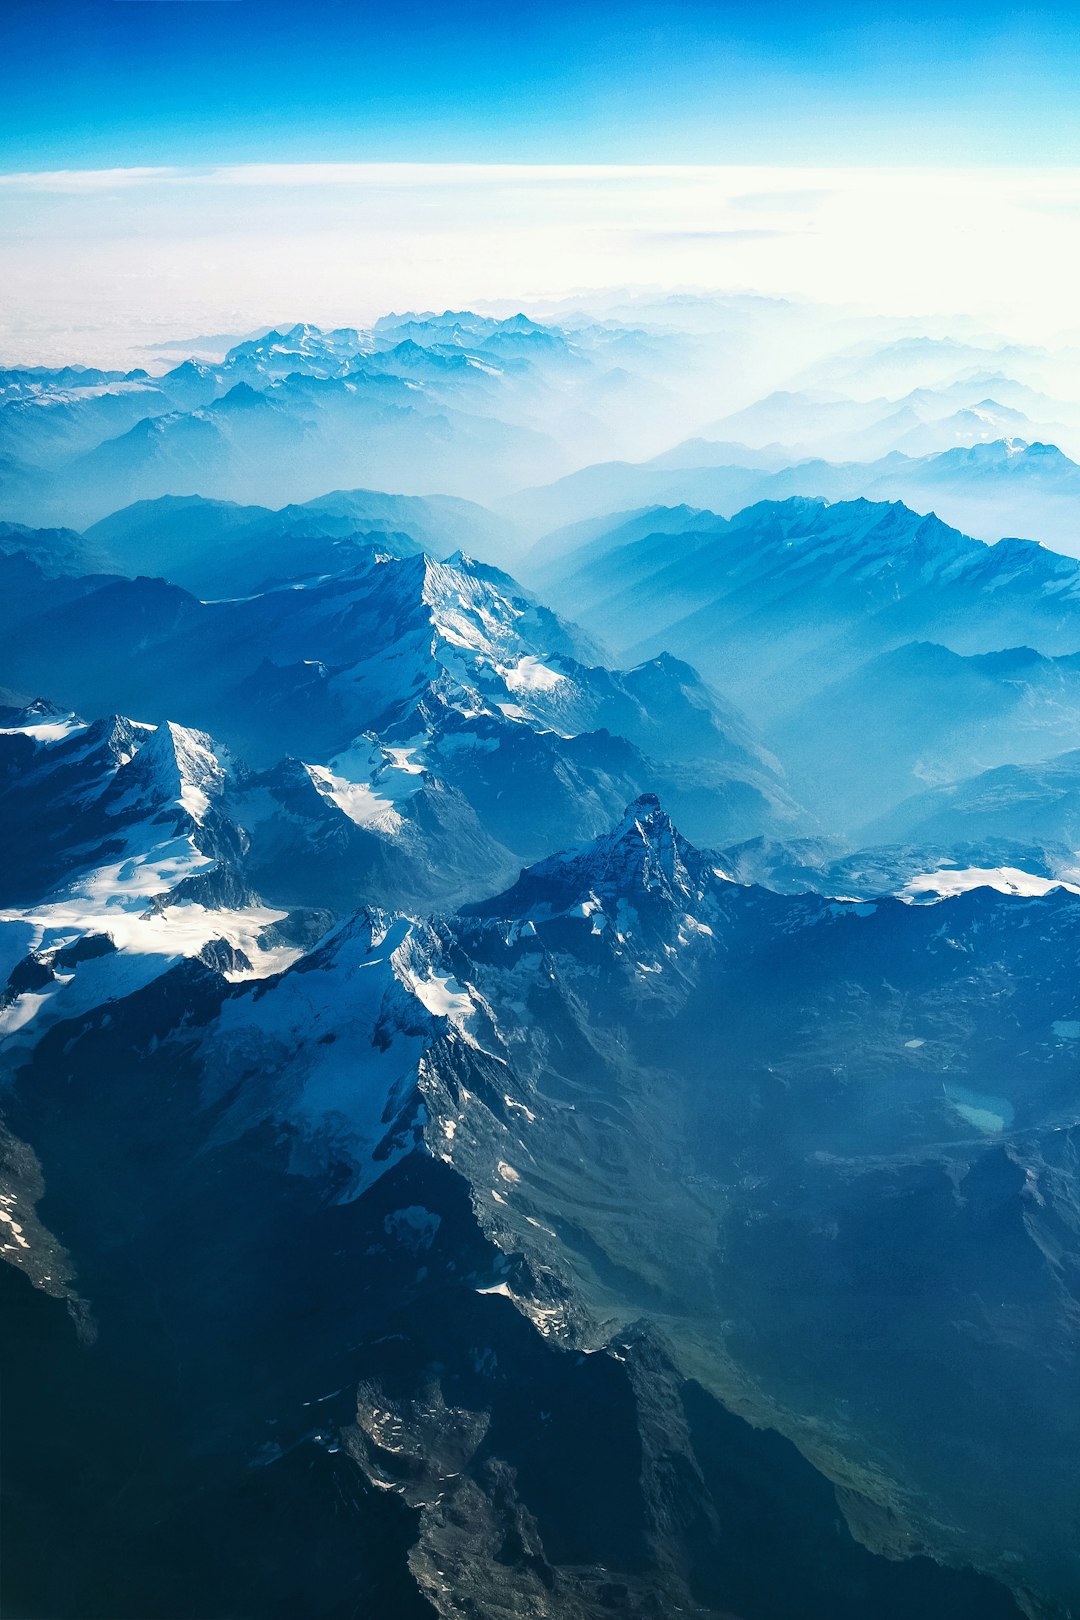 Aerial view of the Alps, snowcapped mountains in blue tones, beautiful nature photography, aerial photo from an airplane, clear sky, high resolution, high detail, sharp focus. The style is similar to studio lighting. –ar 85:128